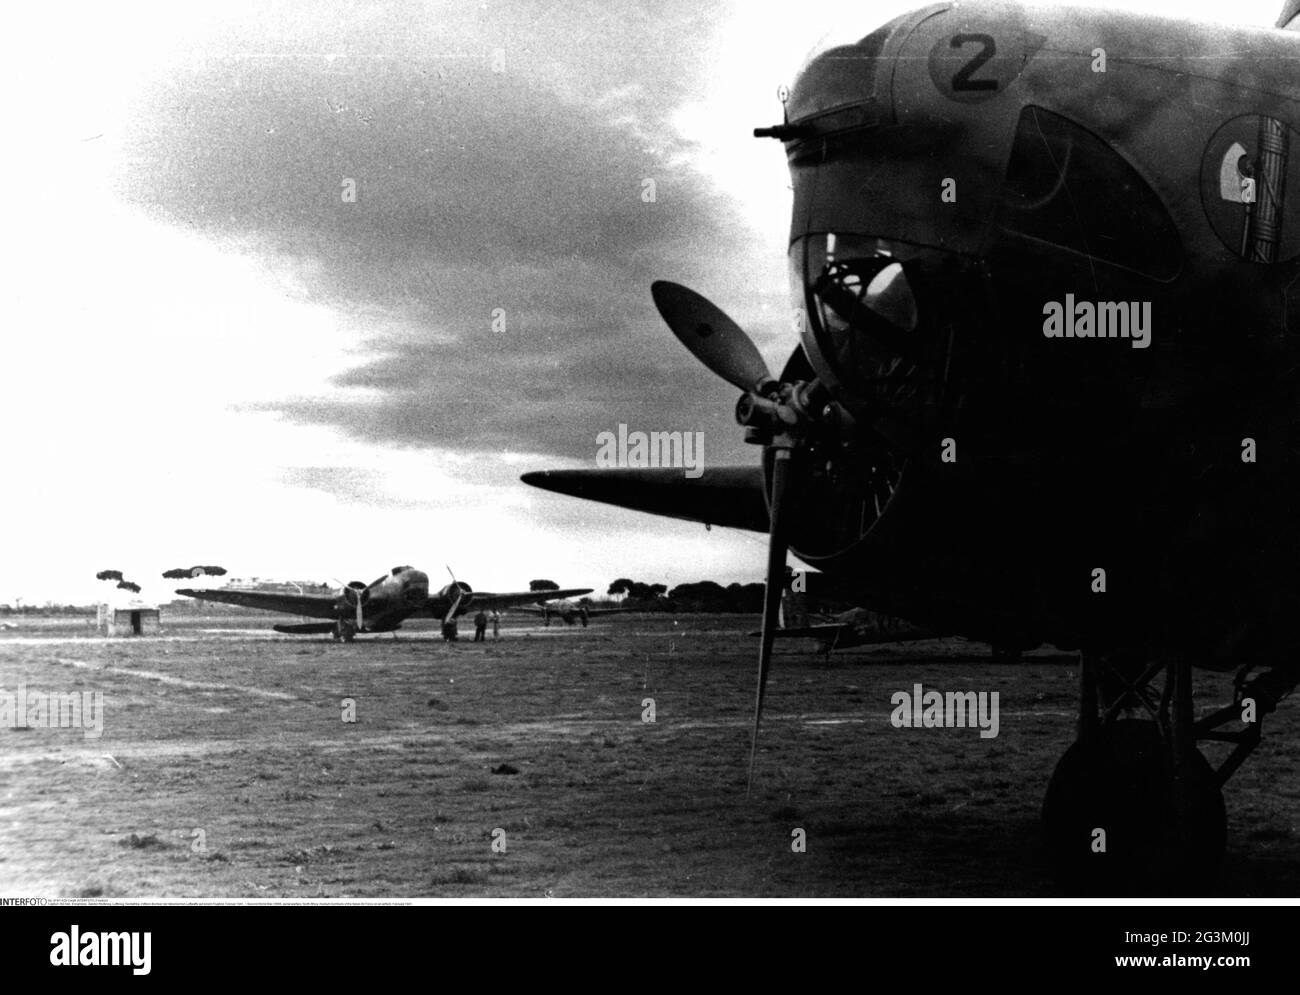 Second World War / WWII, aerial warfare, North Africa, medium bombers of the Italian Air Force on an airfield, February 1941, EDITORIAL-USE-ONLY Stock Photo